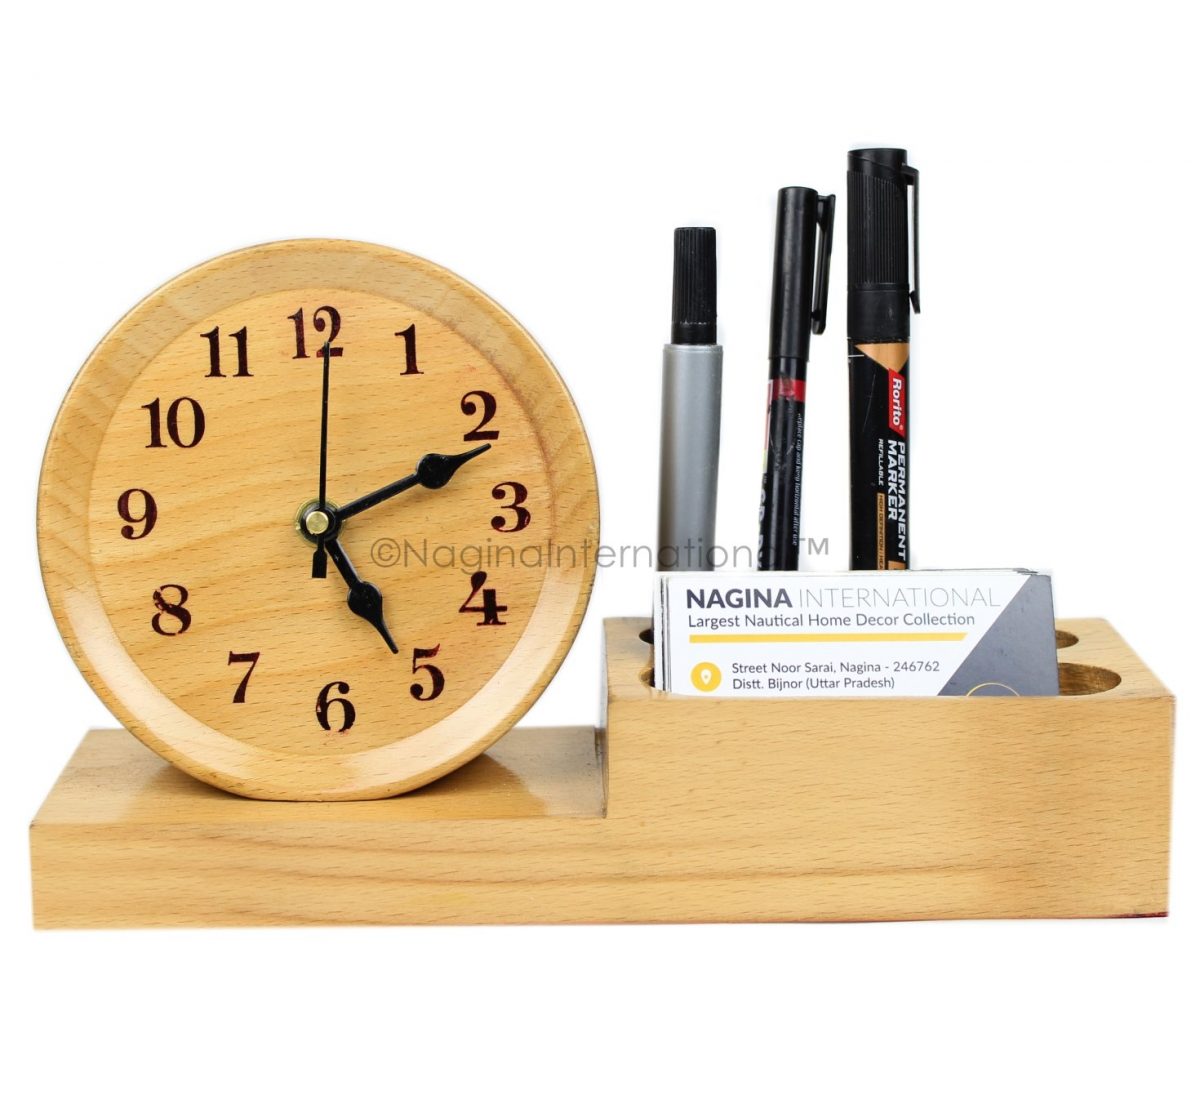 Nagina International Elegant Hand Crafted Wooden Steamed Beech Time's Desk Clock with Pen & Business Visitors Card Holder | Office Decor Time's Clock